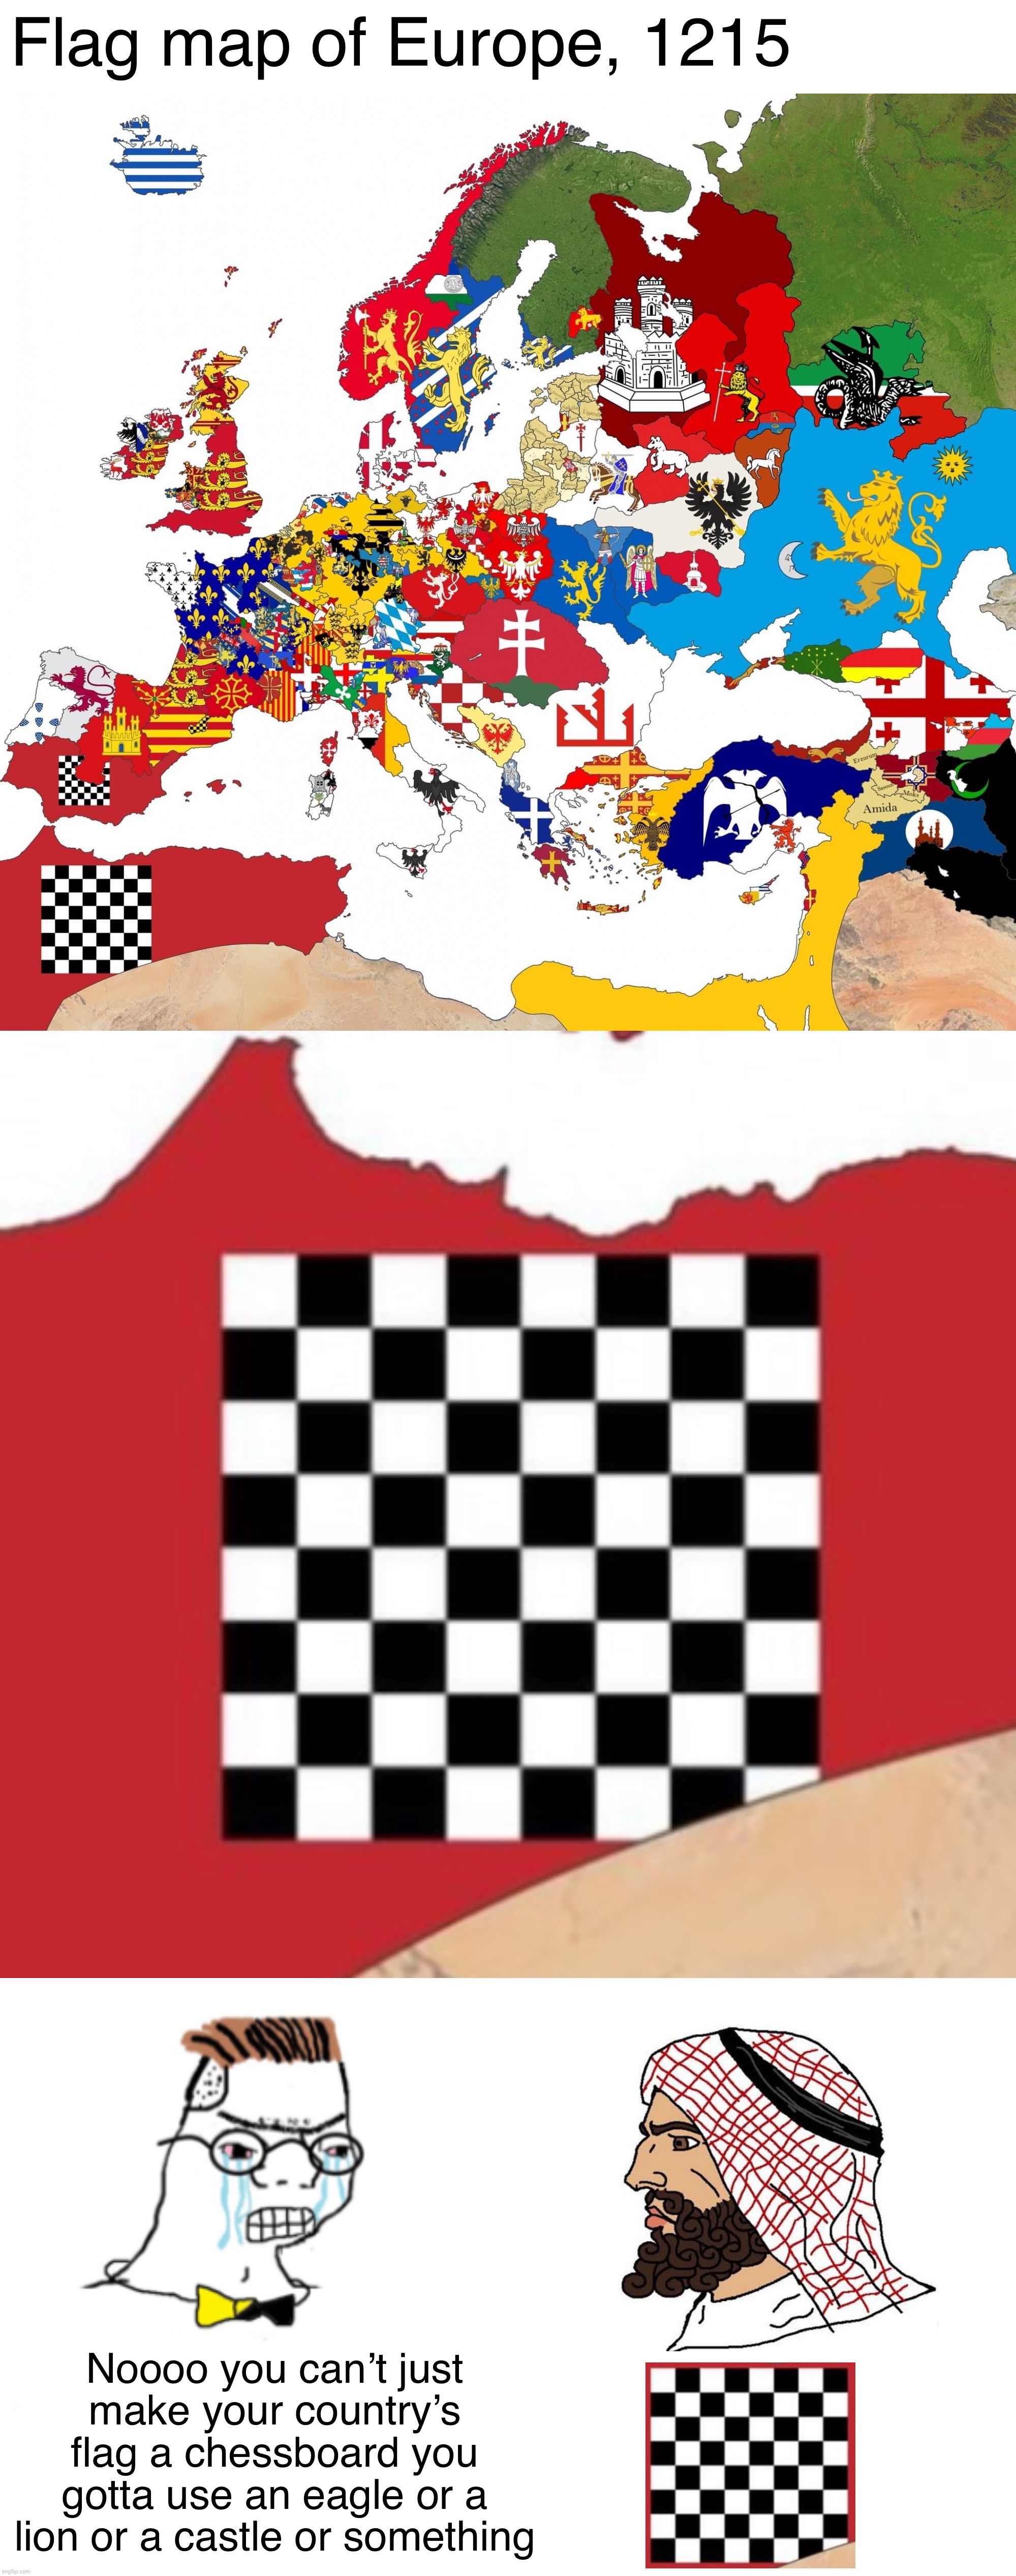 Flag map of Europe, 1215; Noooo you can’t just make your country’s flag a chessboard you gotta use an eagle or a lion or a castle or something | image tagged in flag map of europe in 1215,nooo haha go brrr | made w/ Imgflip meme maker